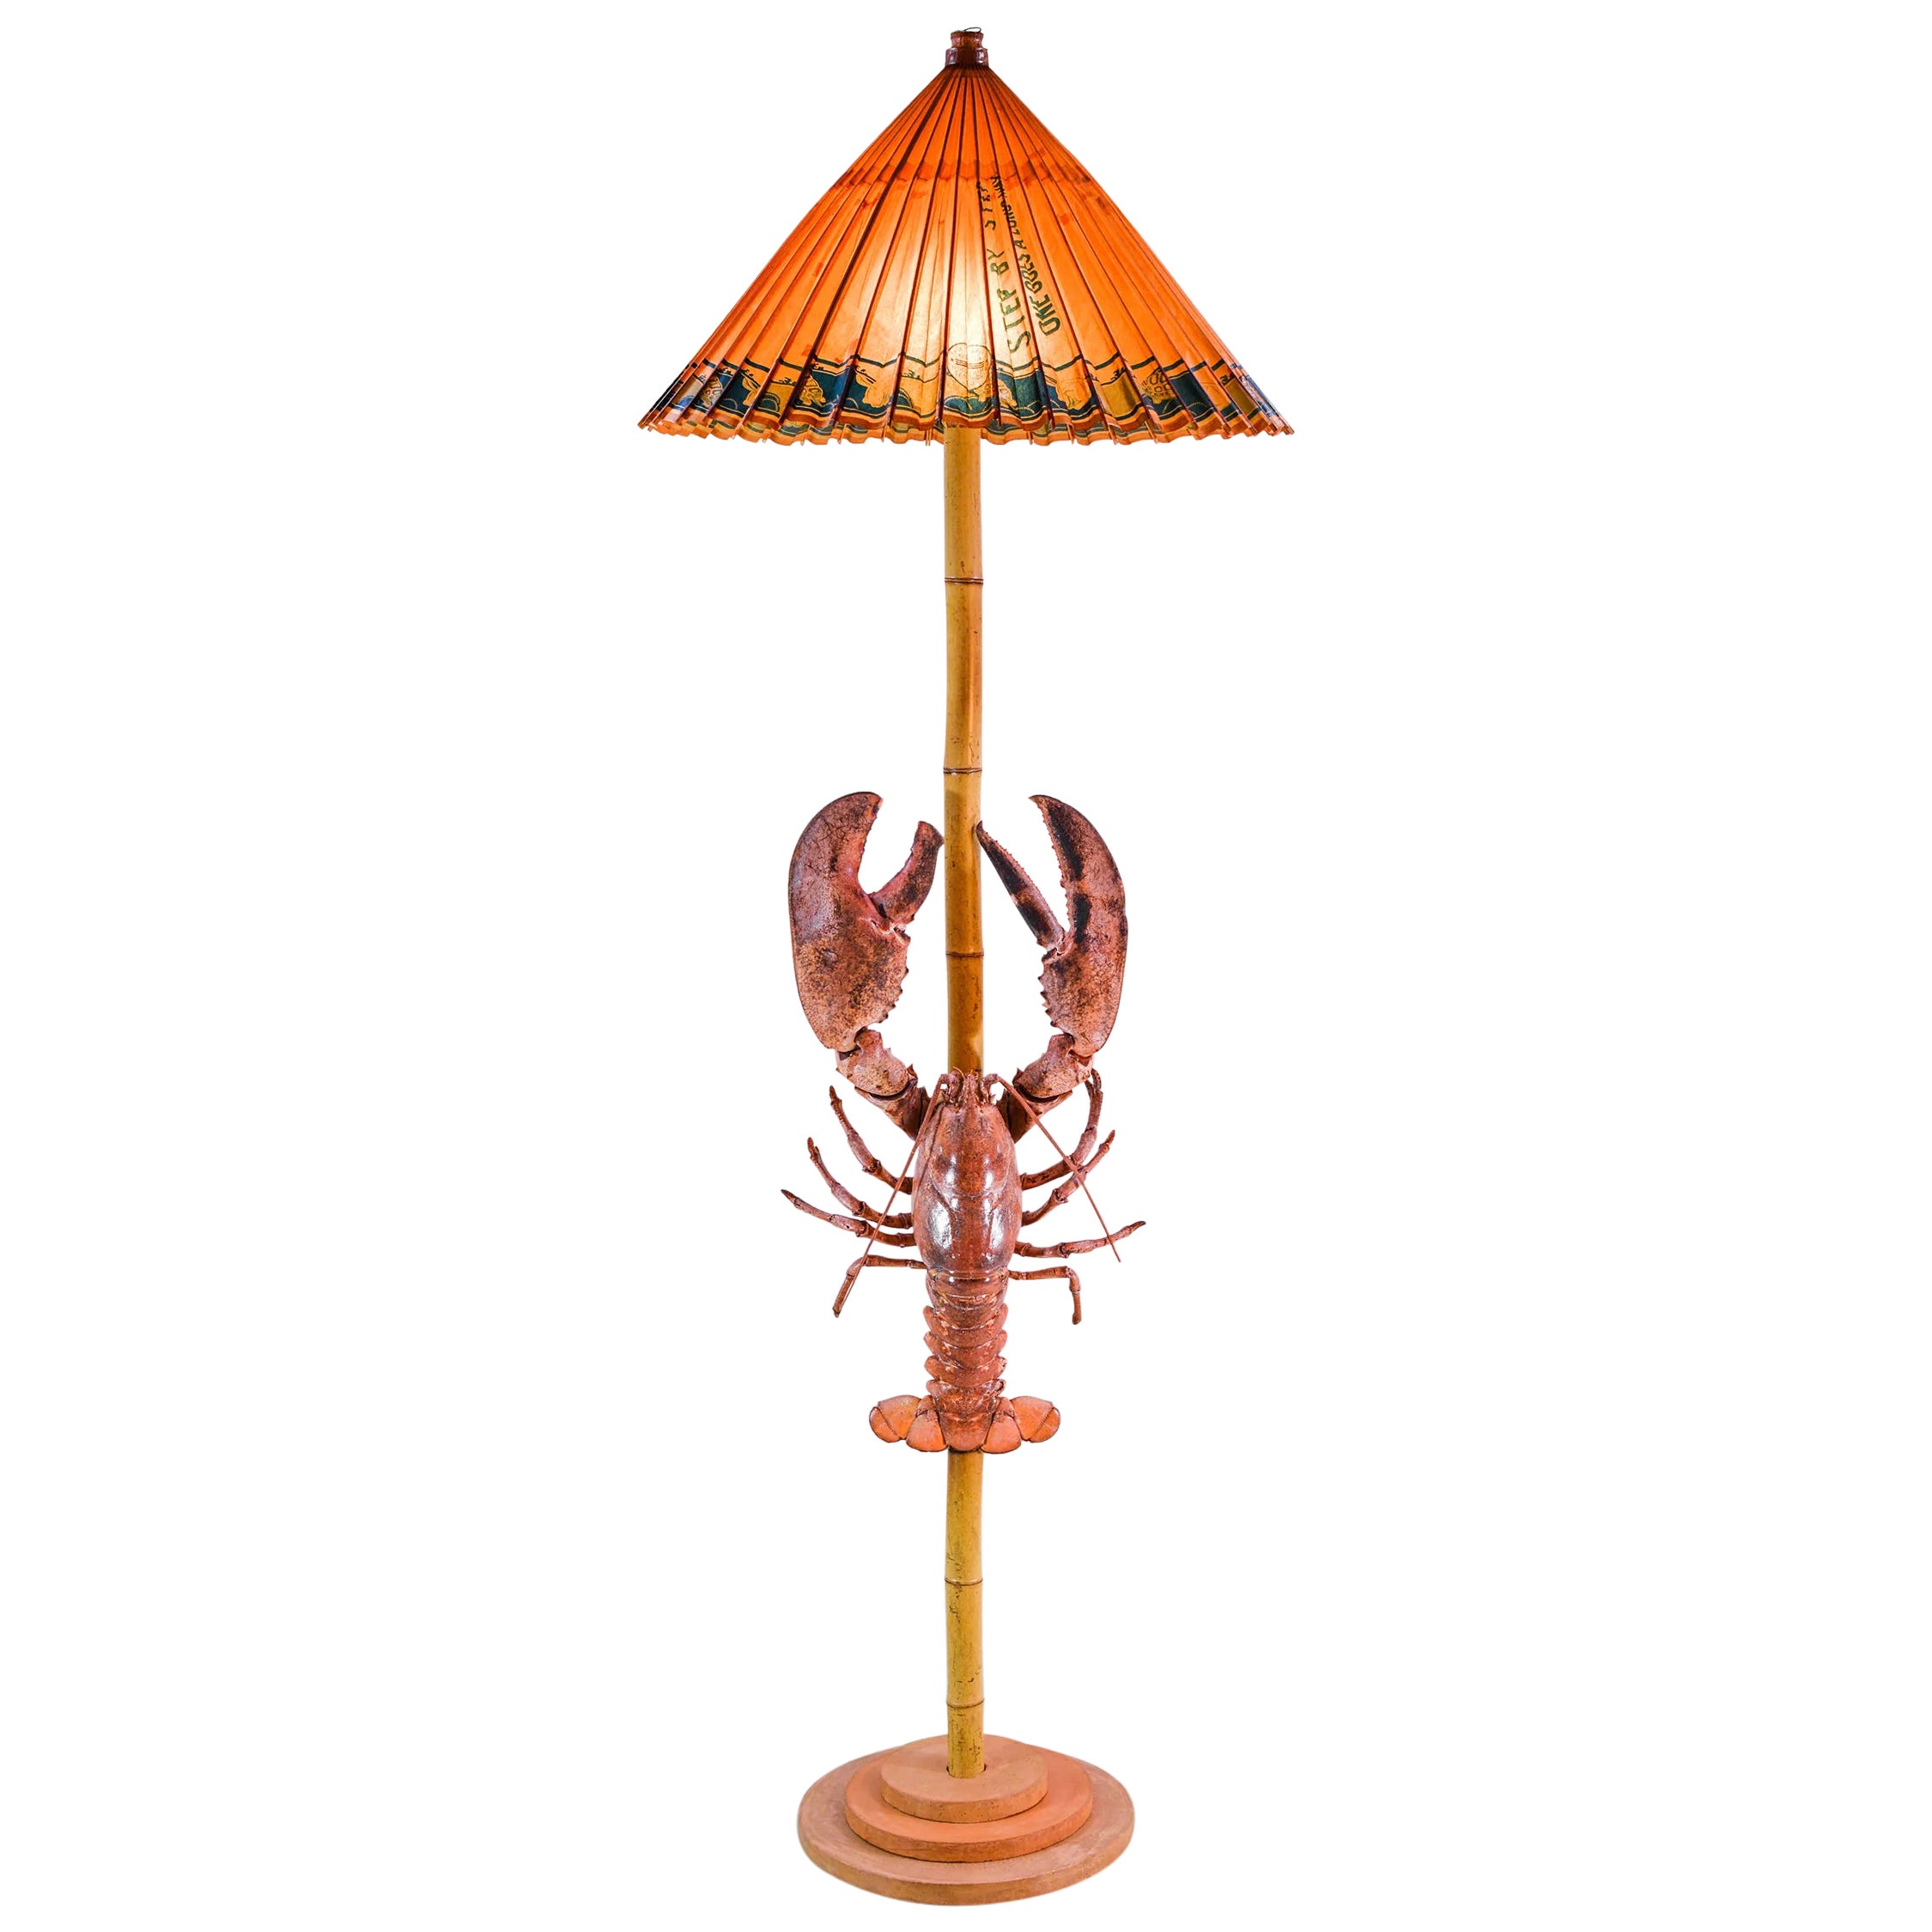 Jumbo Lobster Lamp with Antique Japanese Parasol Shade by Christopher Tennant